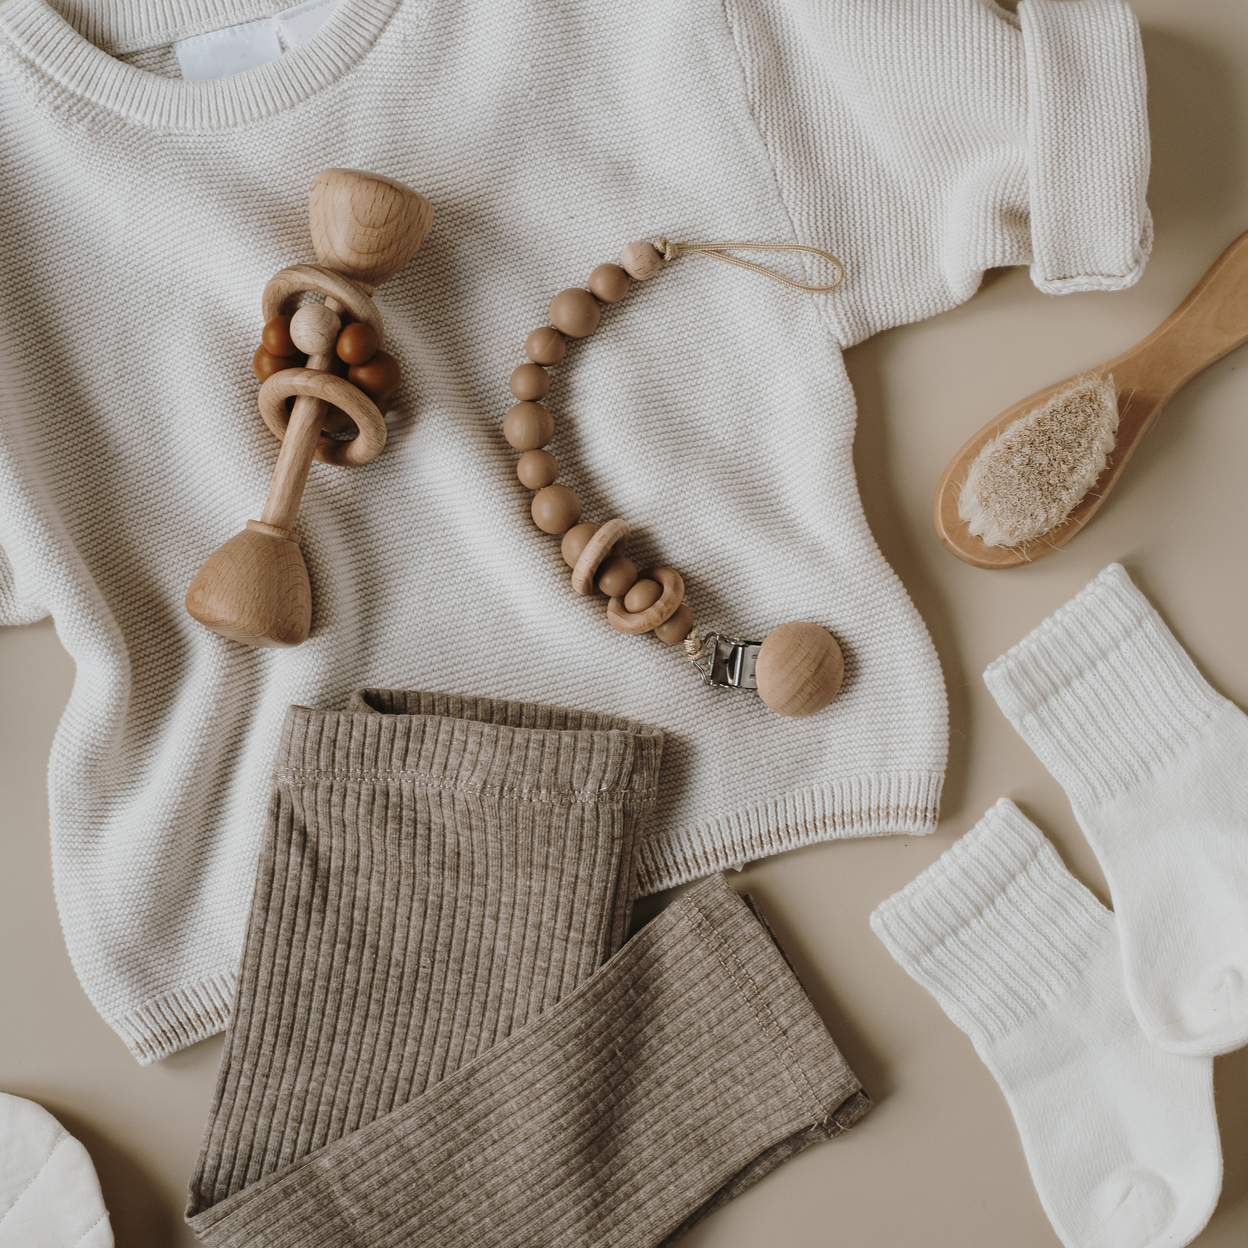 Boho Baby Clothes and Accessories Flat Lay